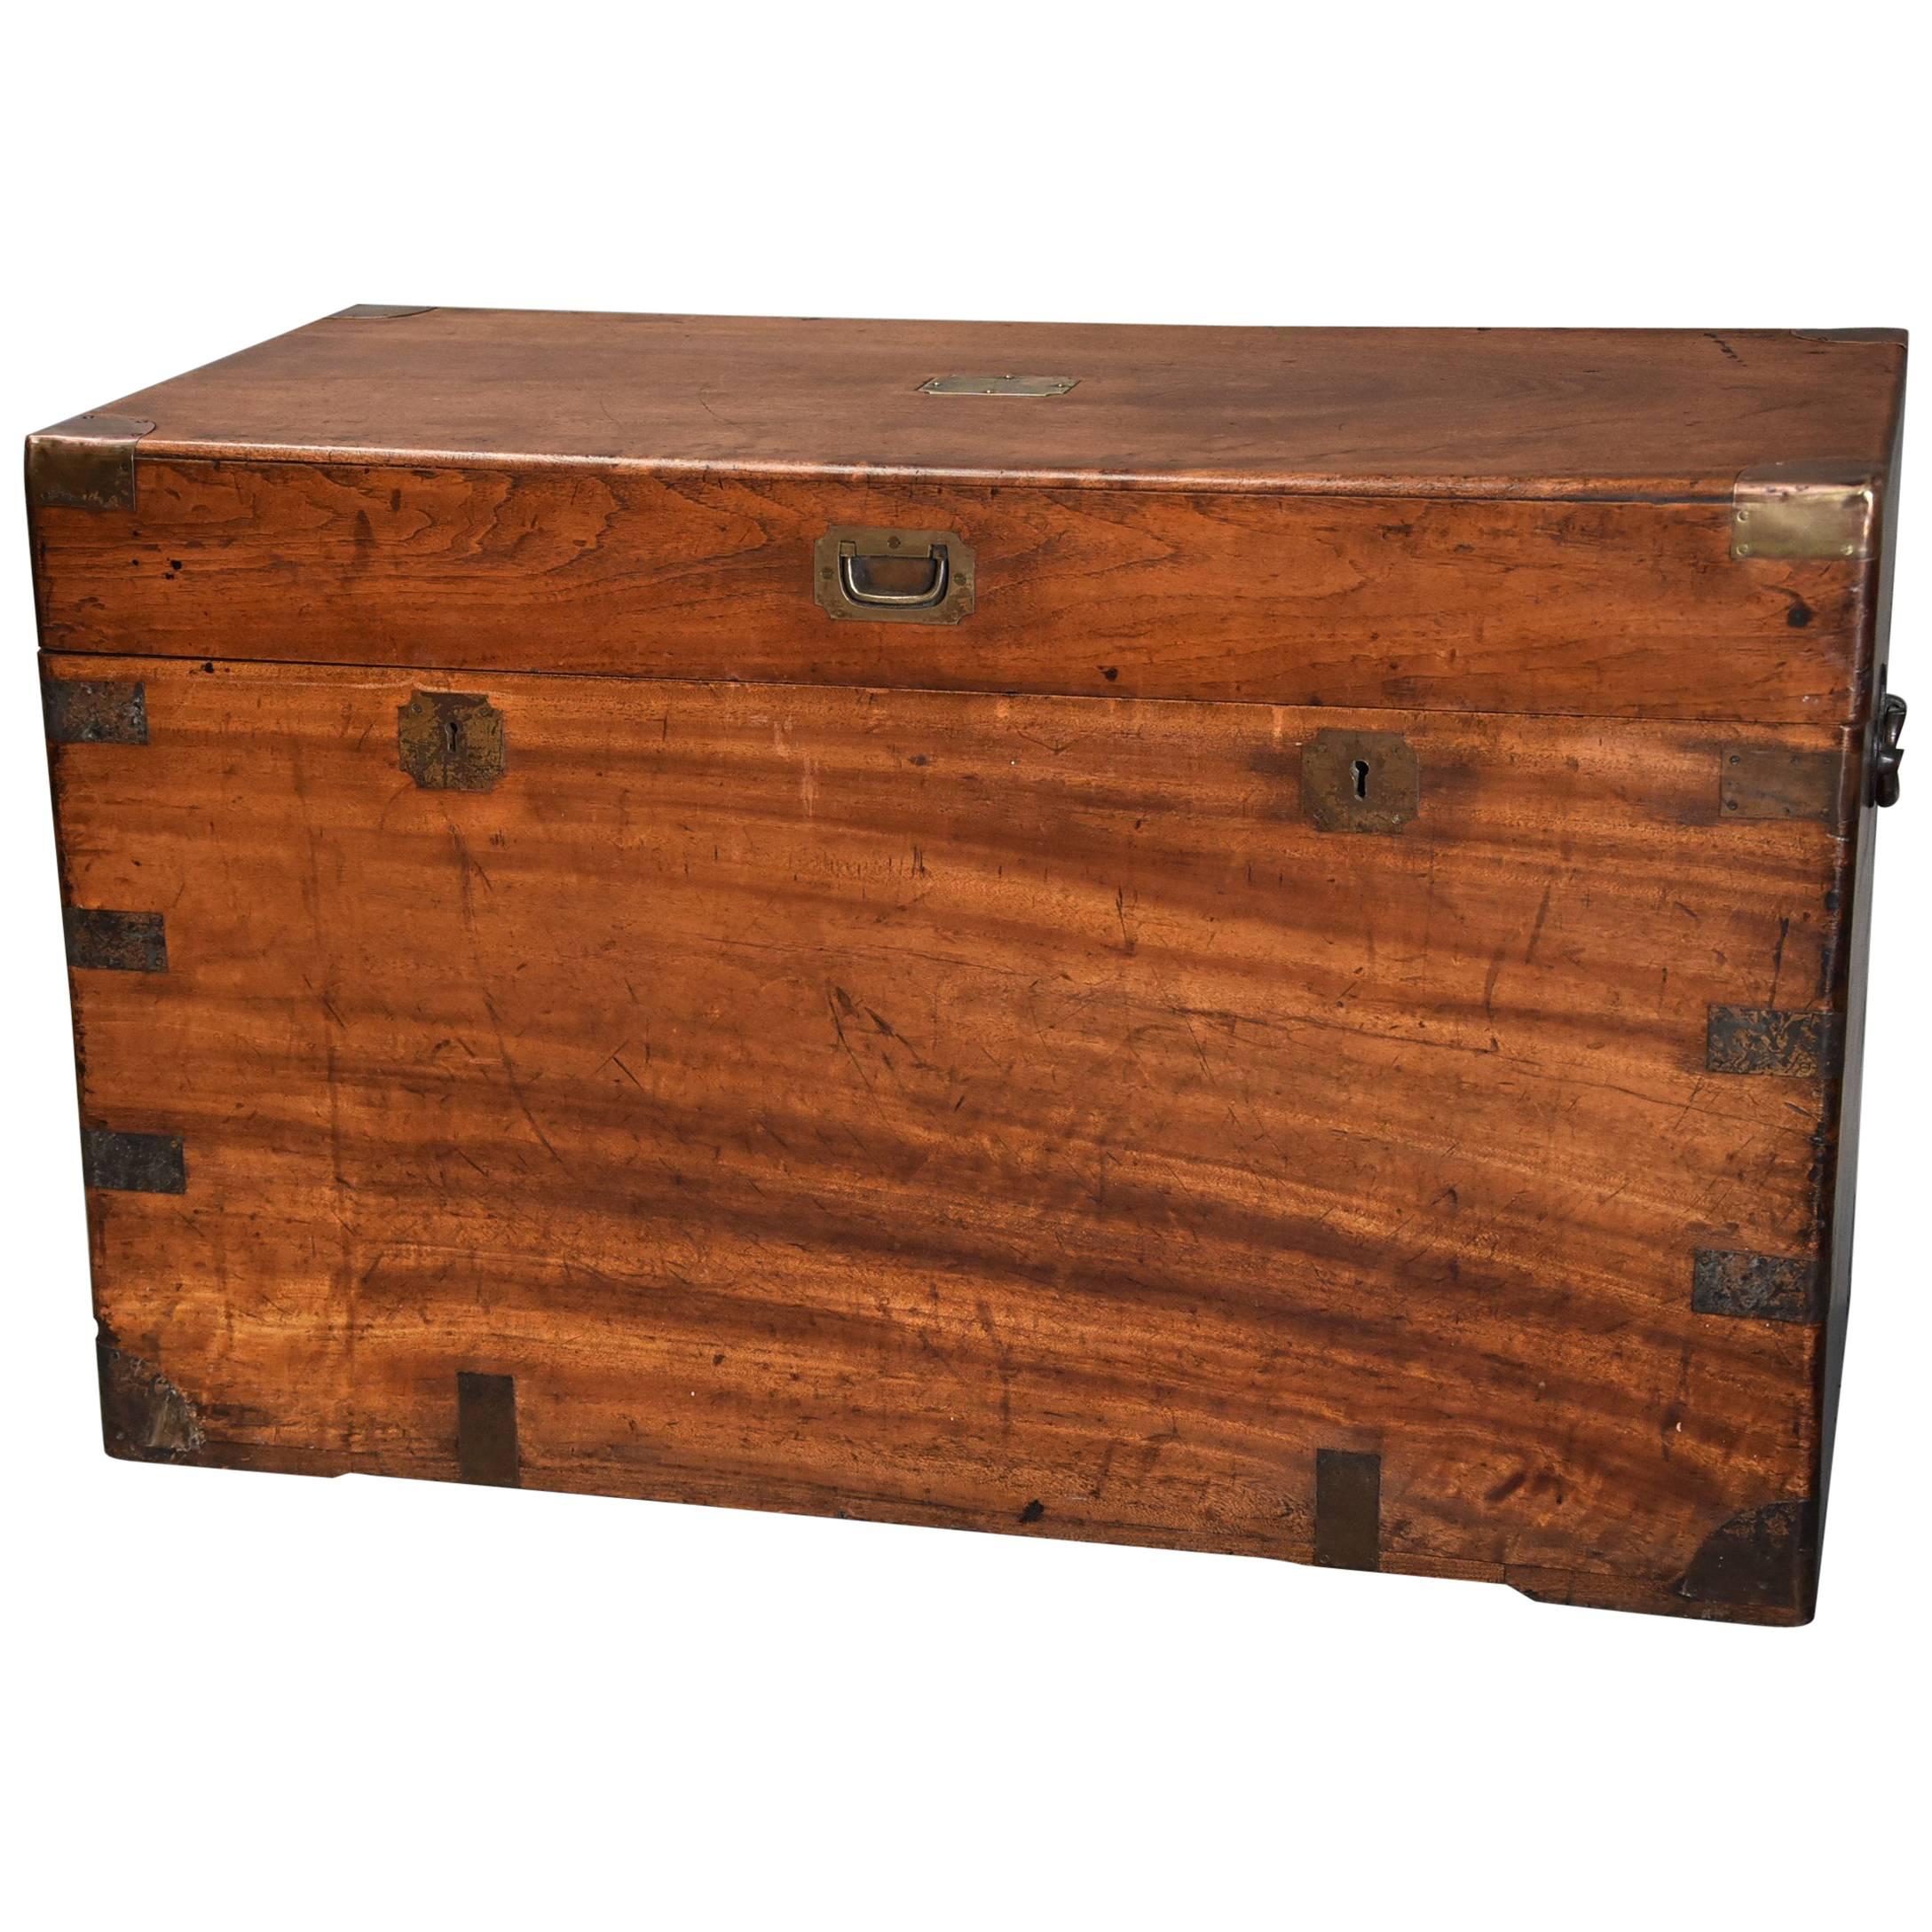 Late 19th Century Military Camphor Wood Travelling Trunk of Good Patina